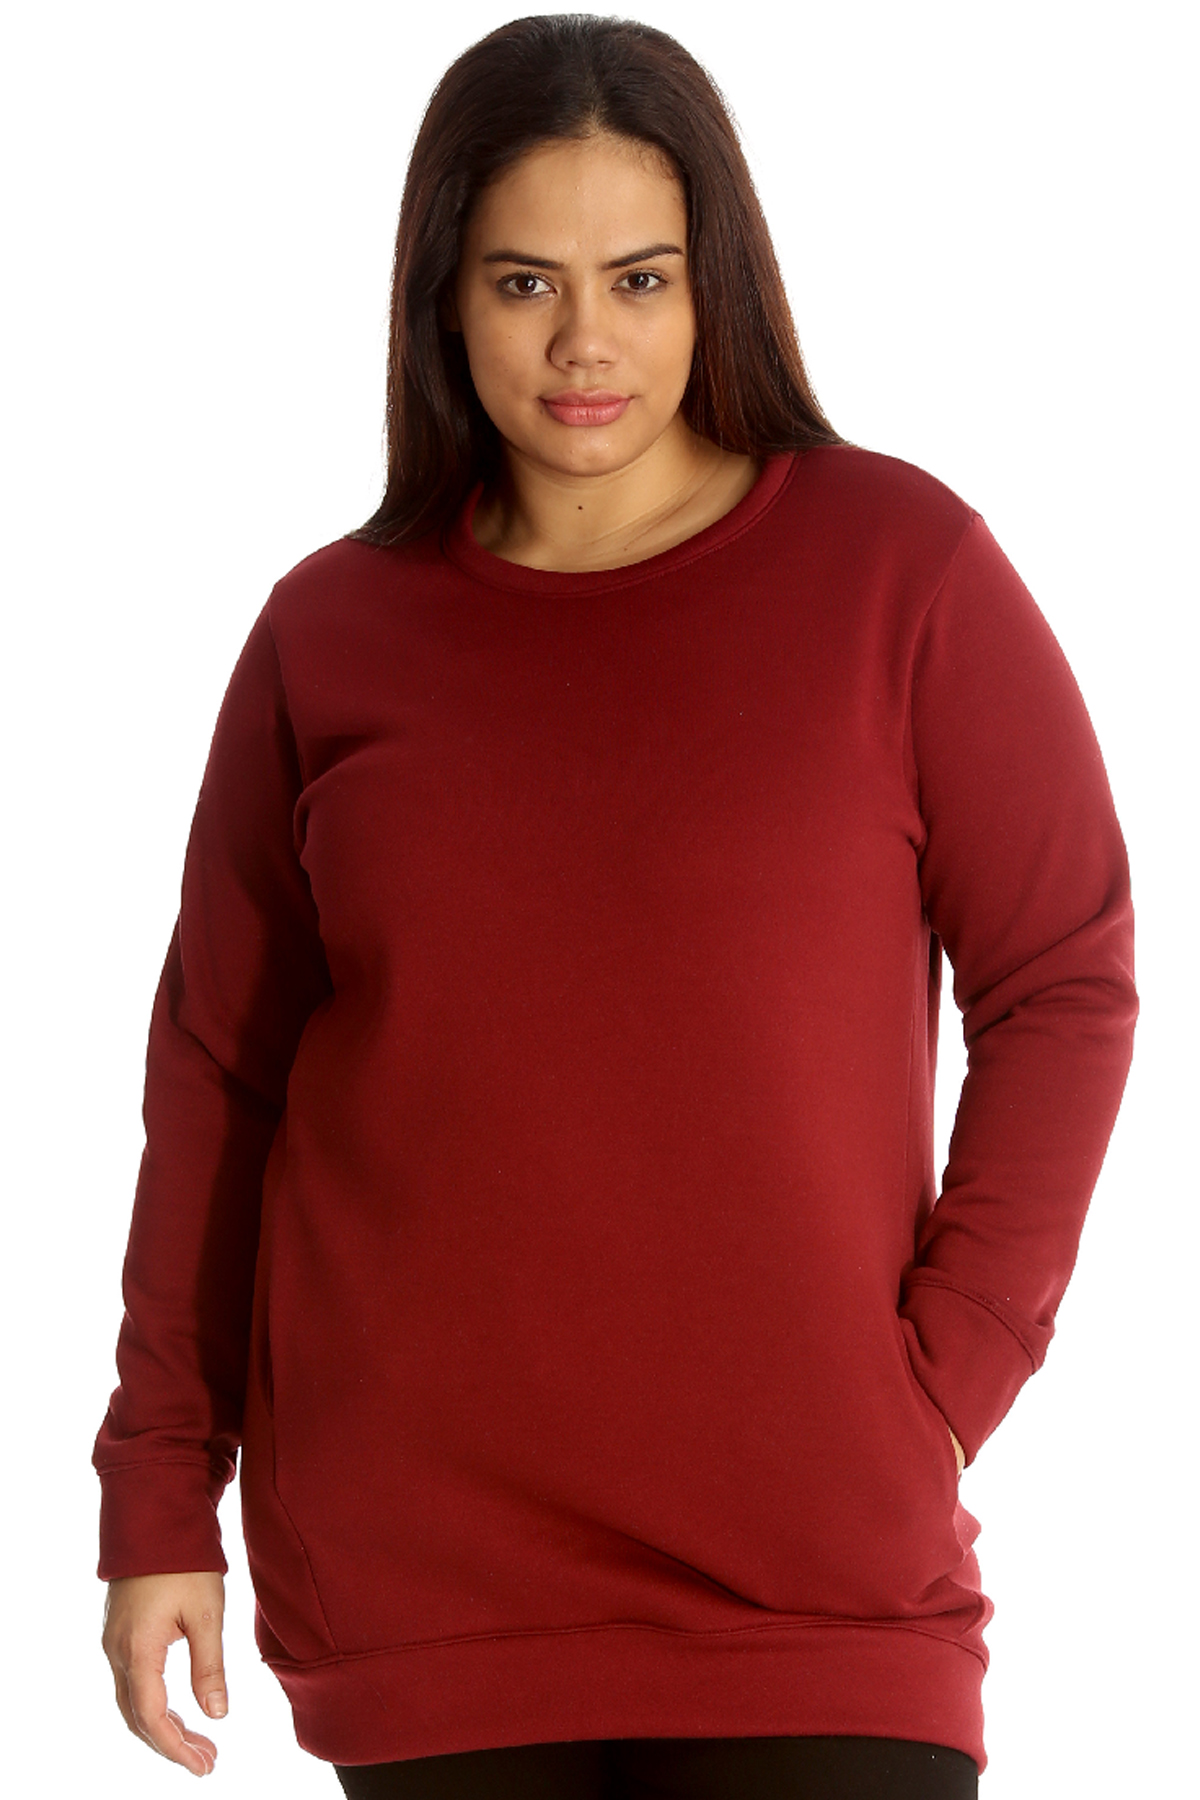 Wear funeral petite cardigan sweatshirts for women size that, Full hand blouse designs for silk sarees, red wonder woman t shirt. 